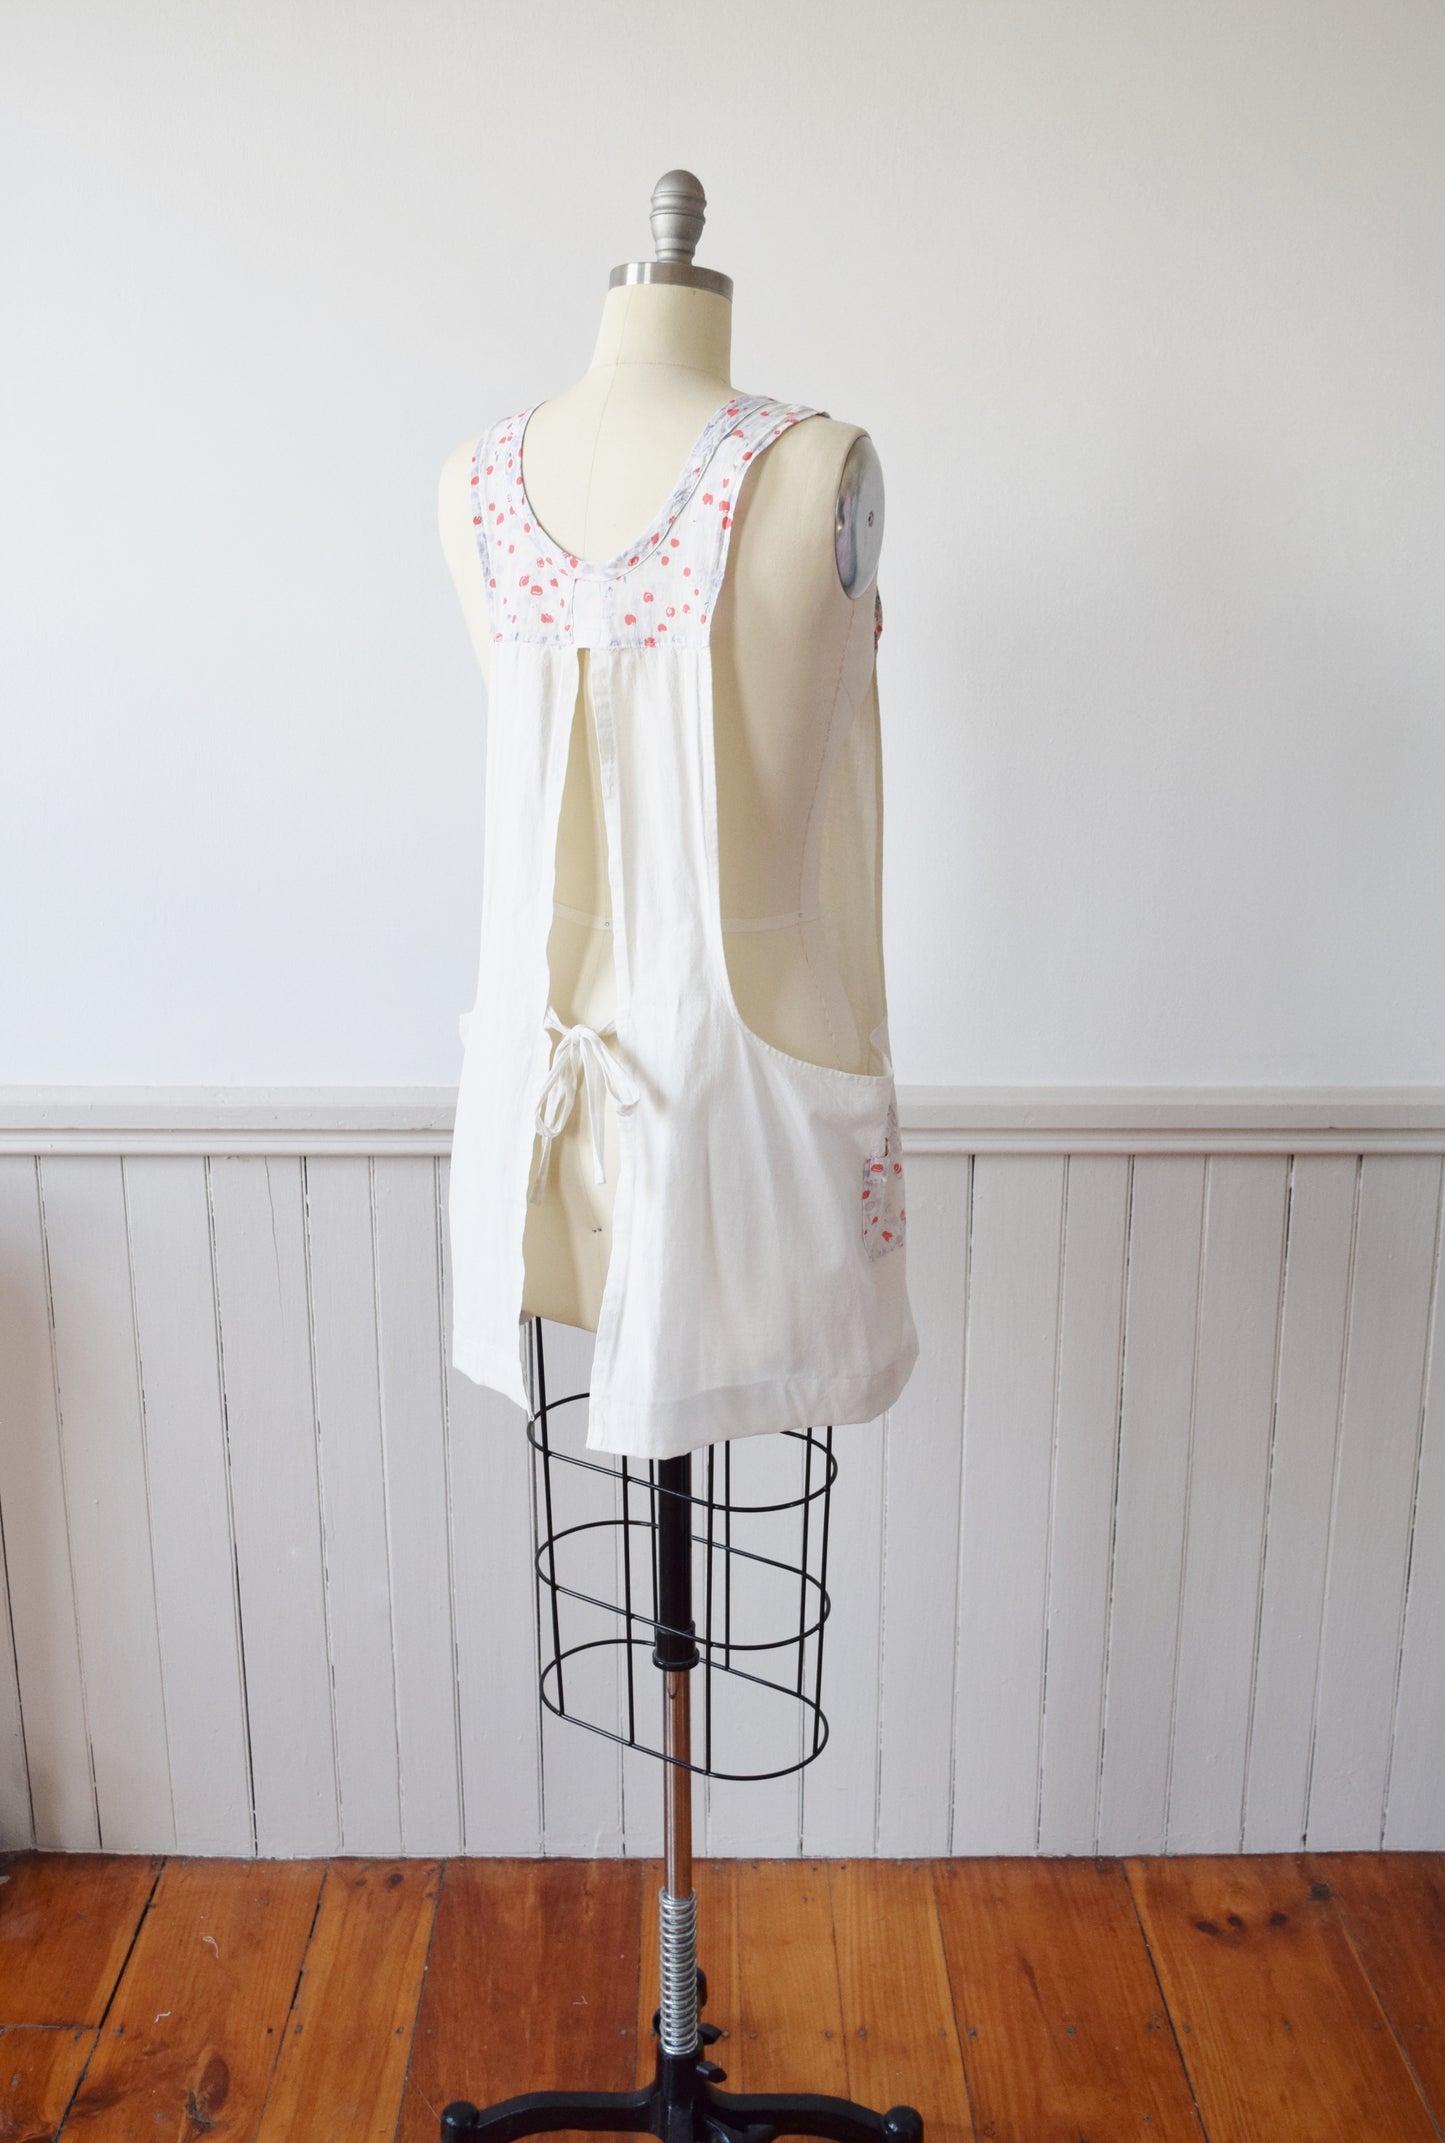 1920s Smock | Apron with Novelty Print Accents